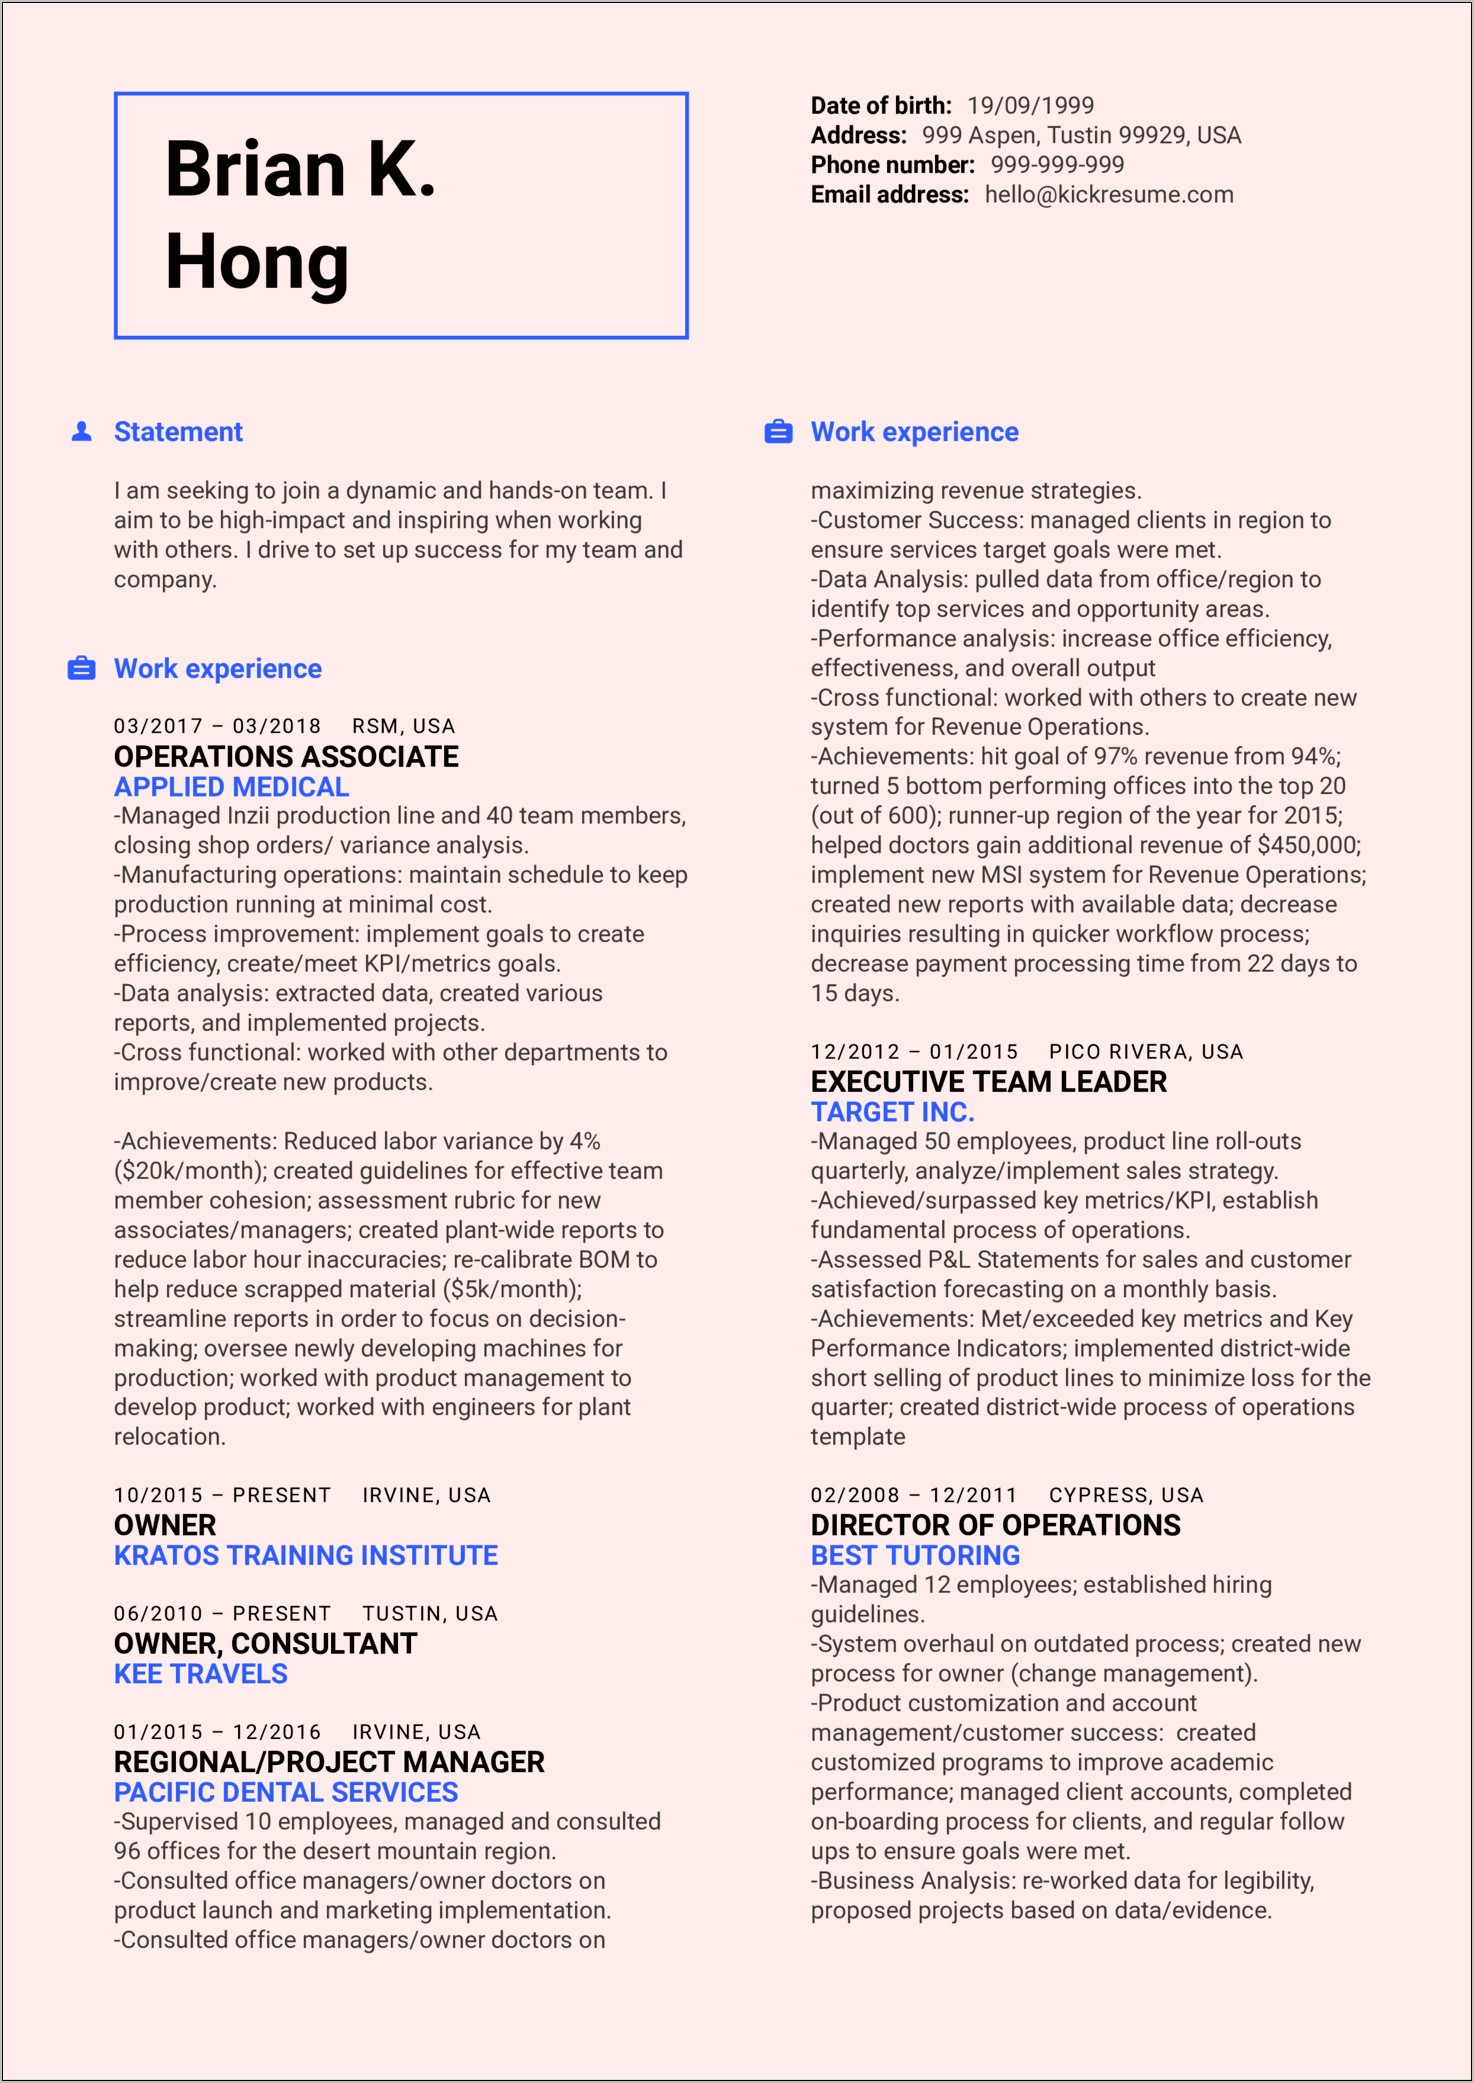 Sample Medical Claims Manager Resume